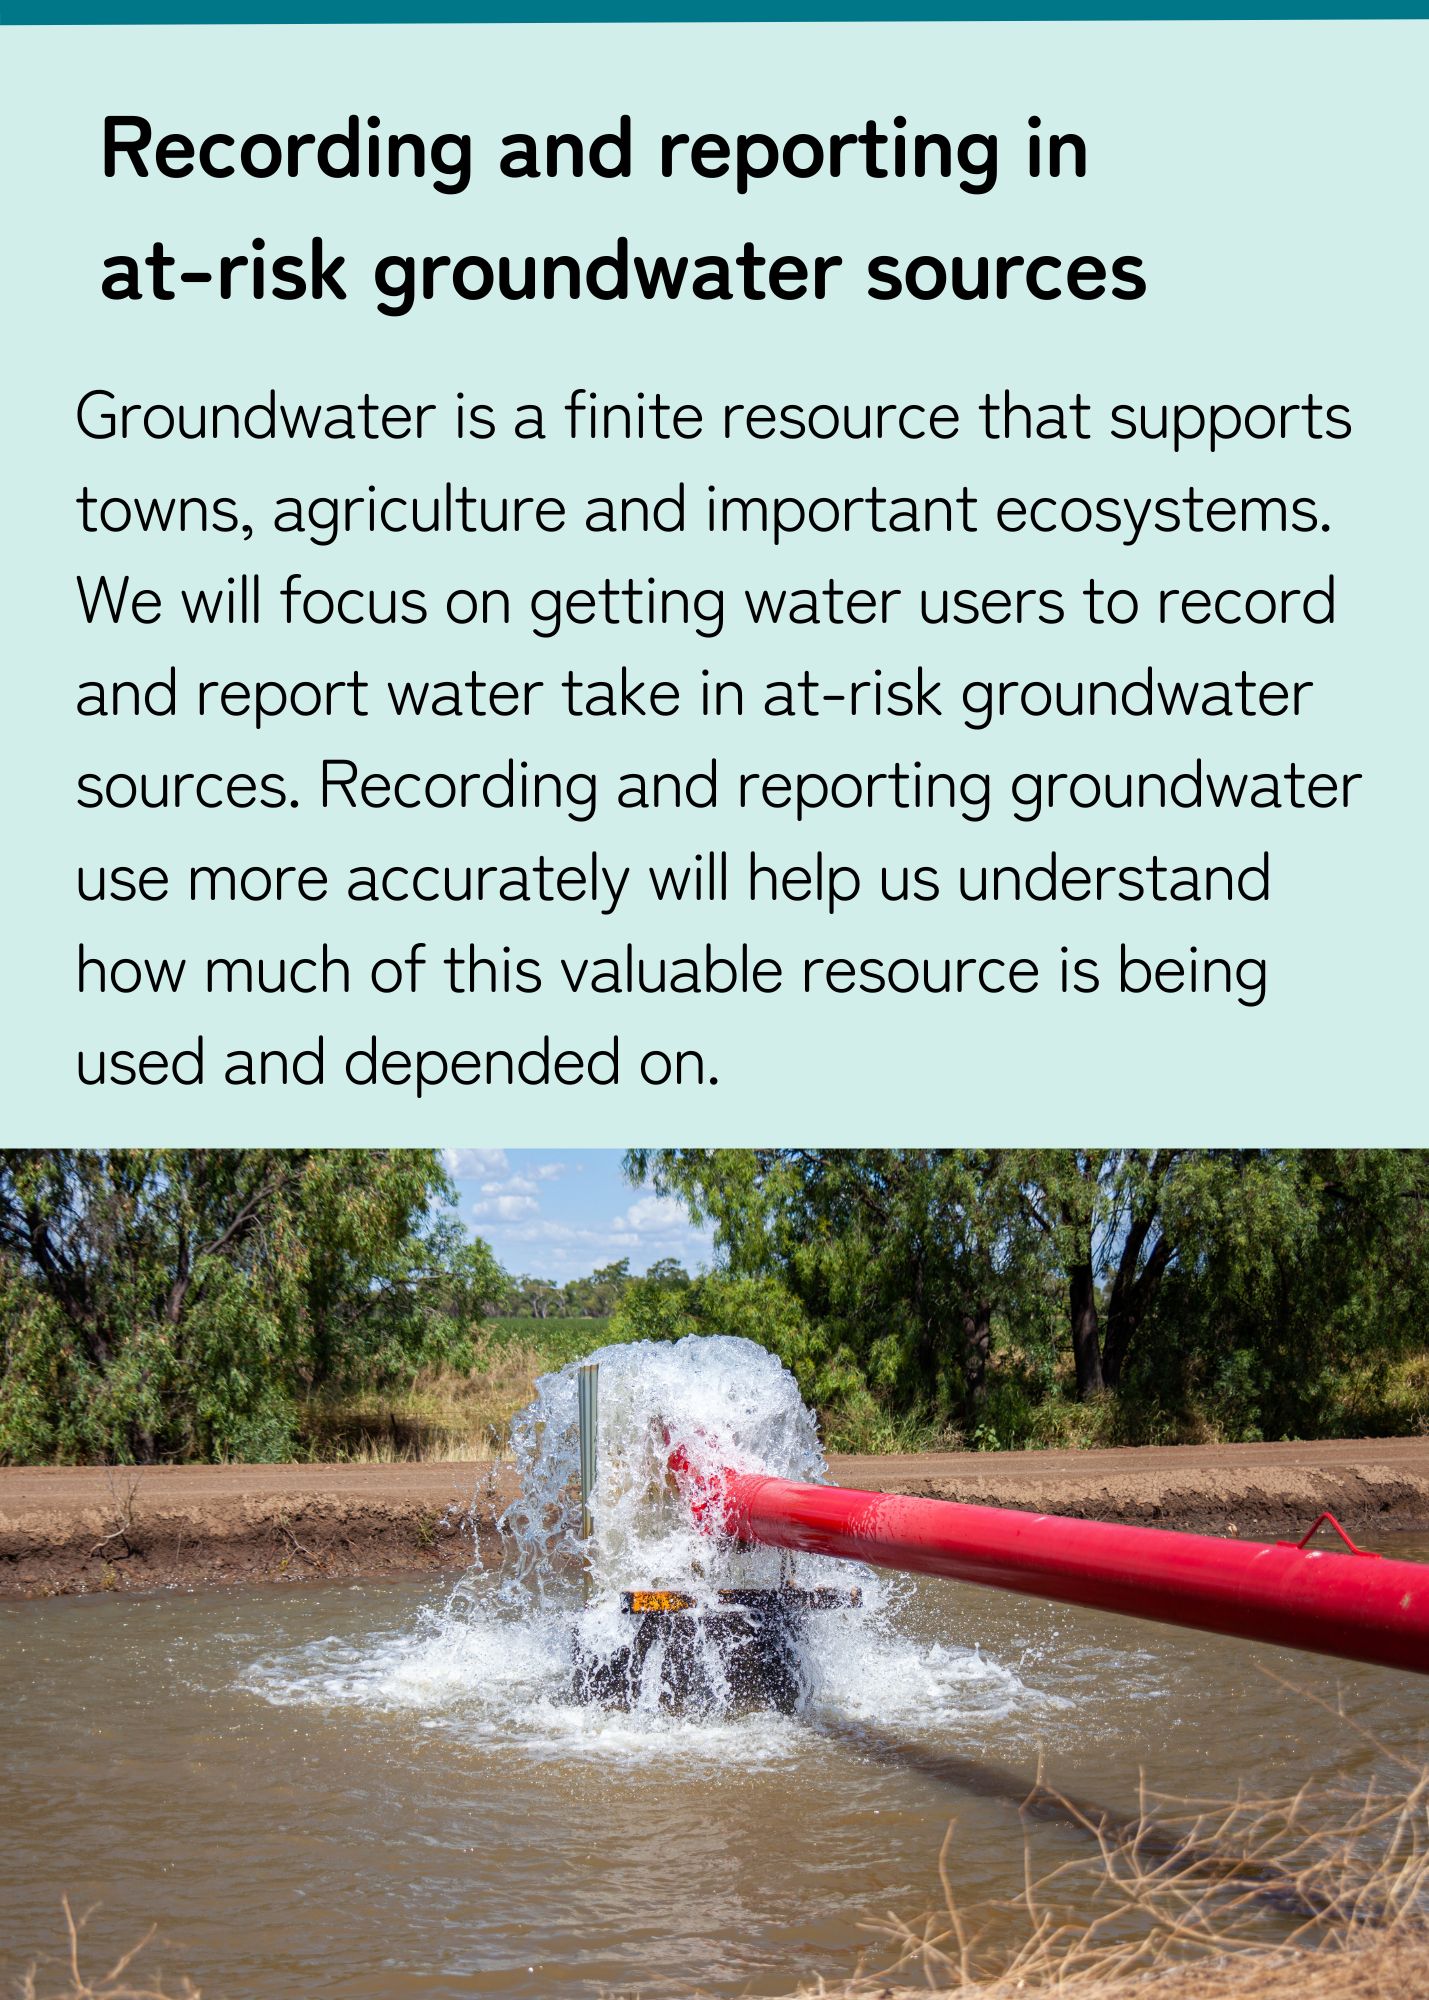 Groundwater is a finite resource that supports towns, agriculture and important ecosystems.  We will focus on getting water users to report water take in at-risk groundwater sources. Recording and reporting groundwater use more accurately will help us understand how much of this valuable resource is being used and depended on. 